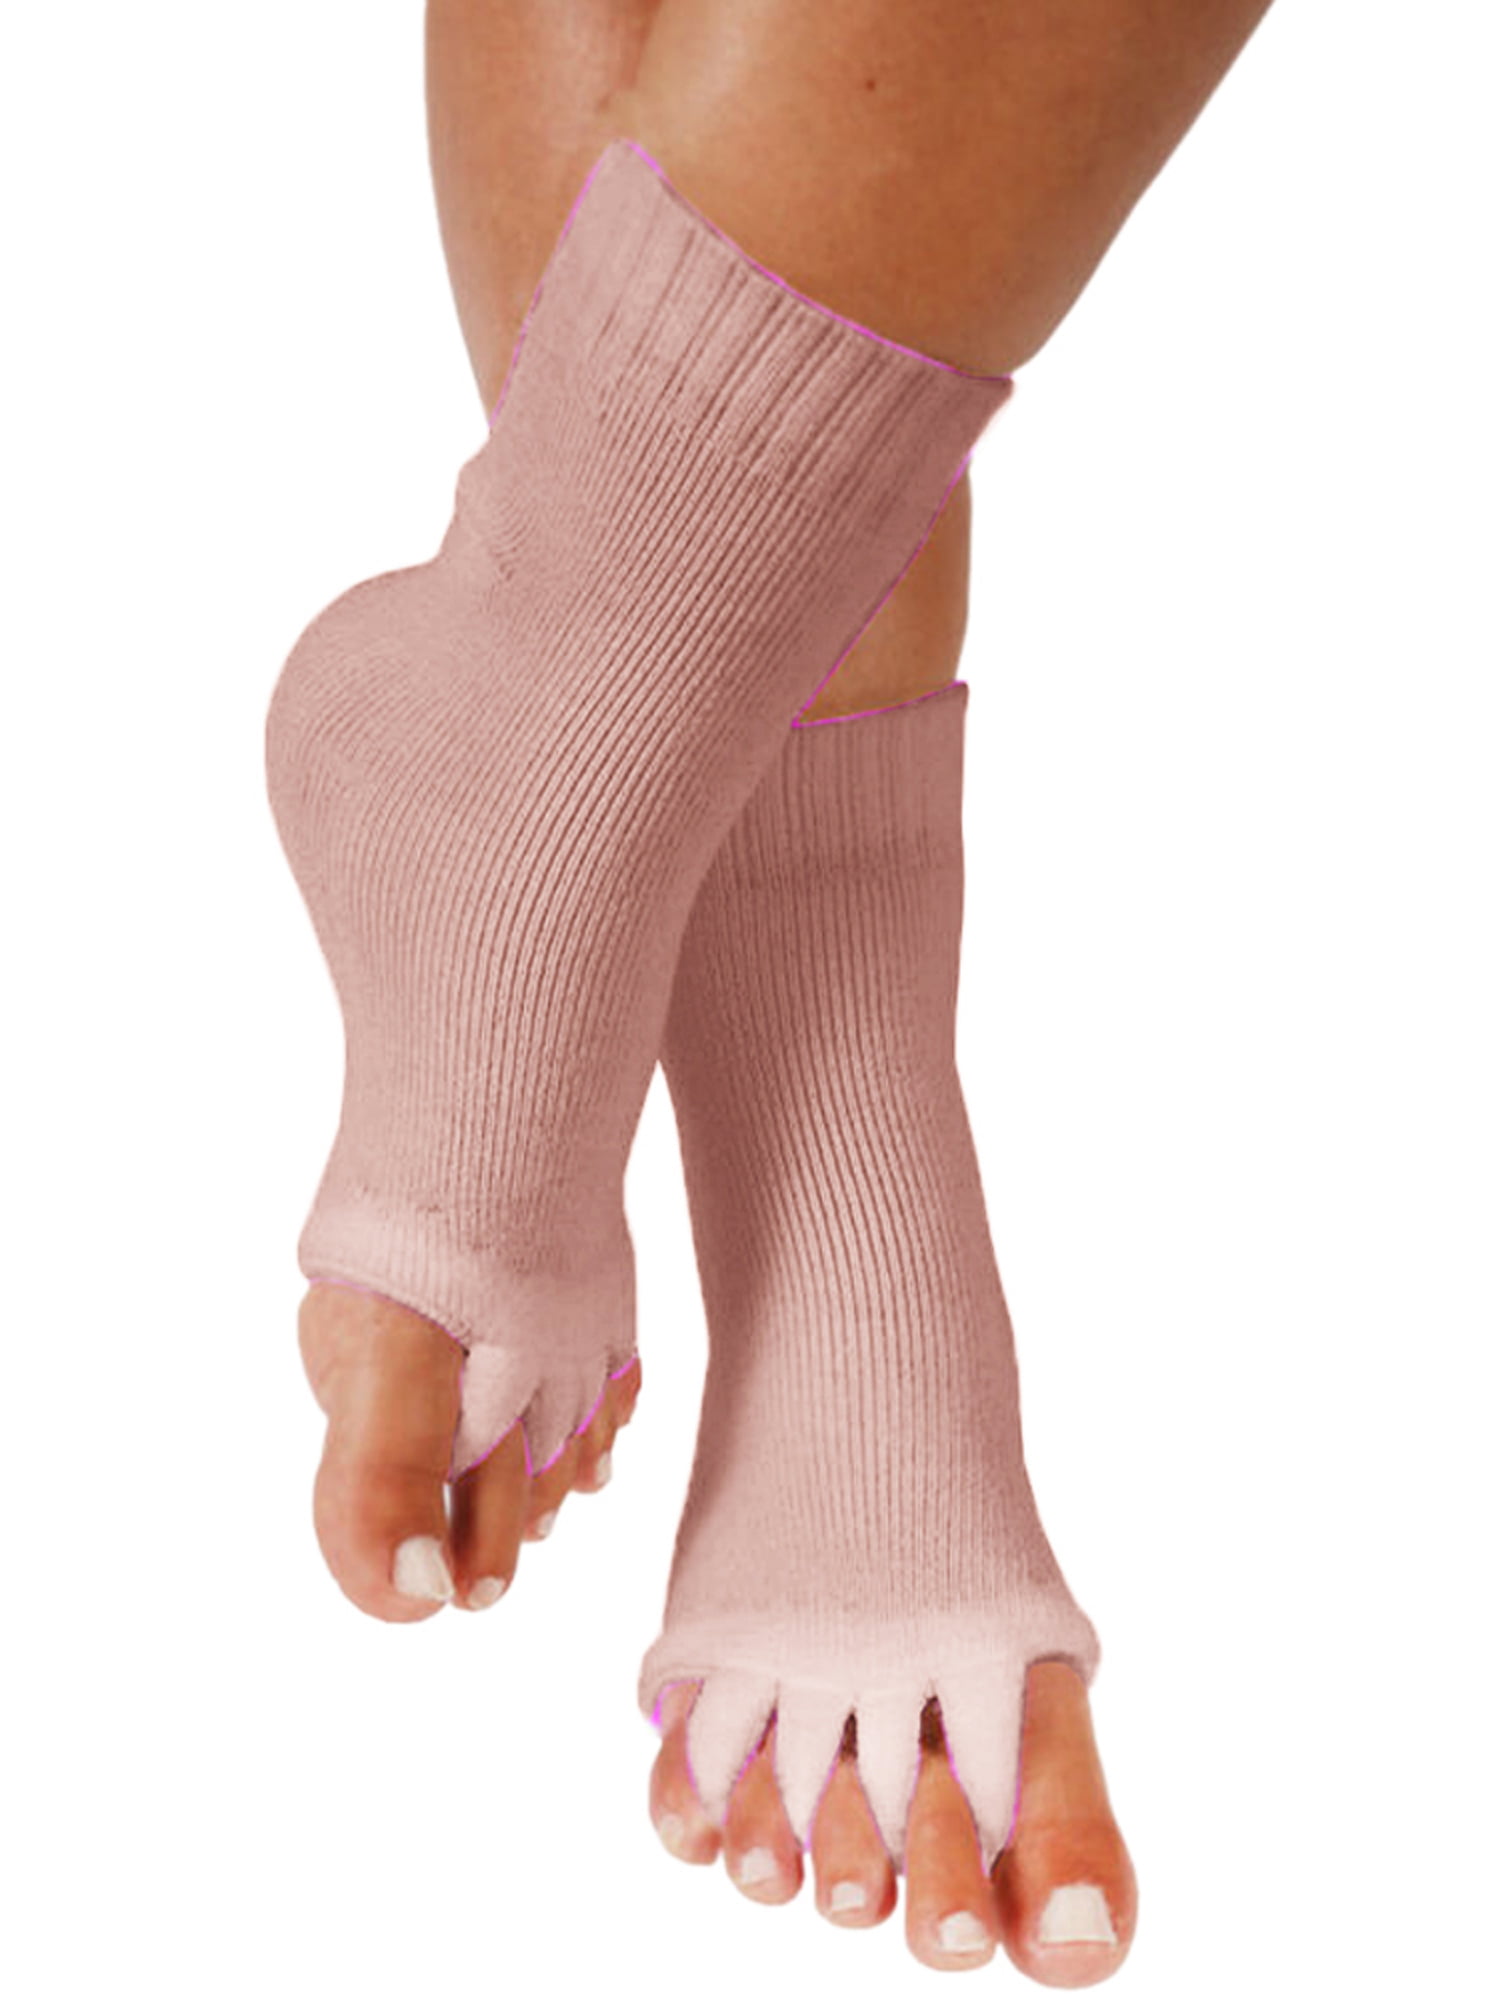 Bcurb Alignment Toe Separator Spacer Socks Stretch Tendon Pain Relief Yoga. 